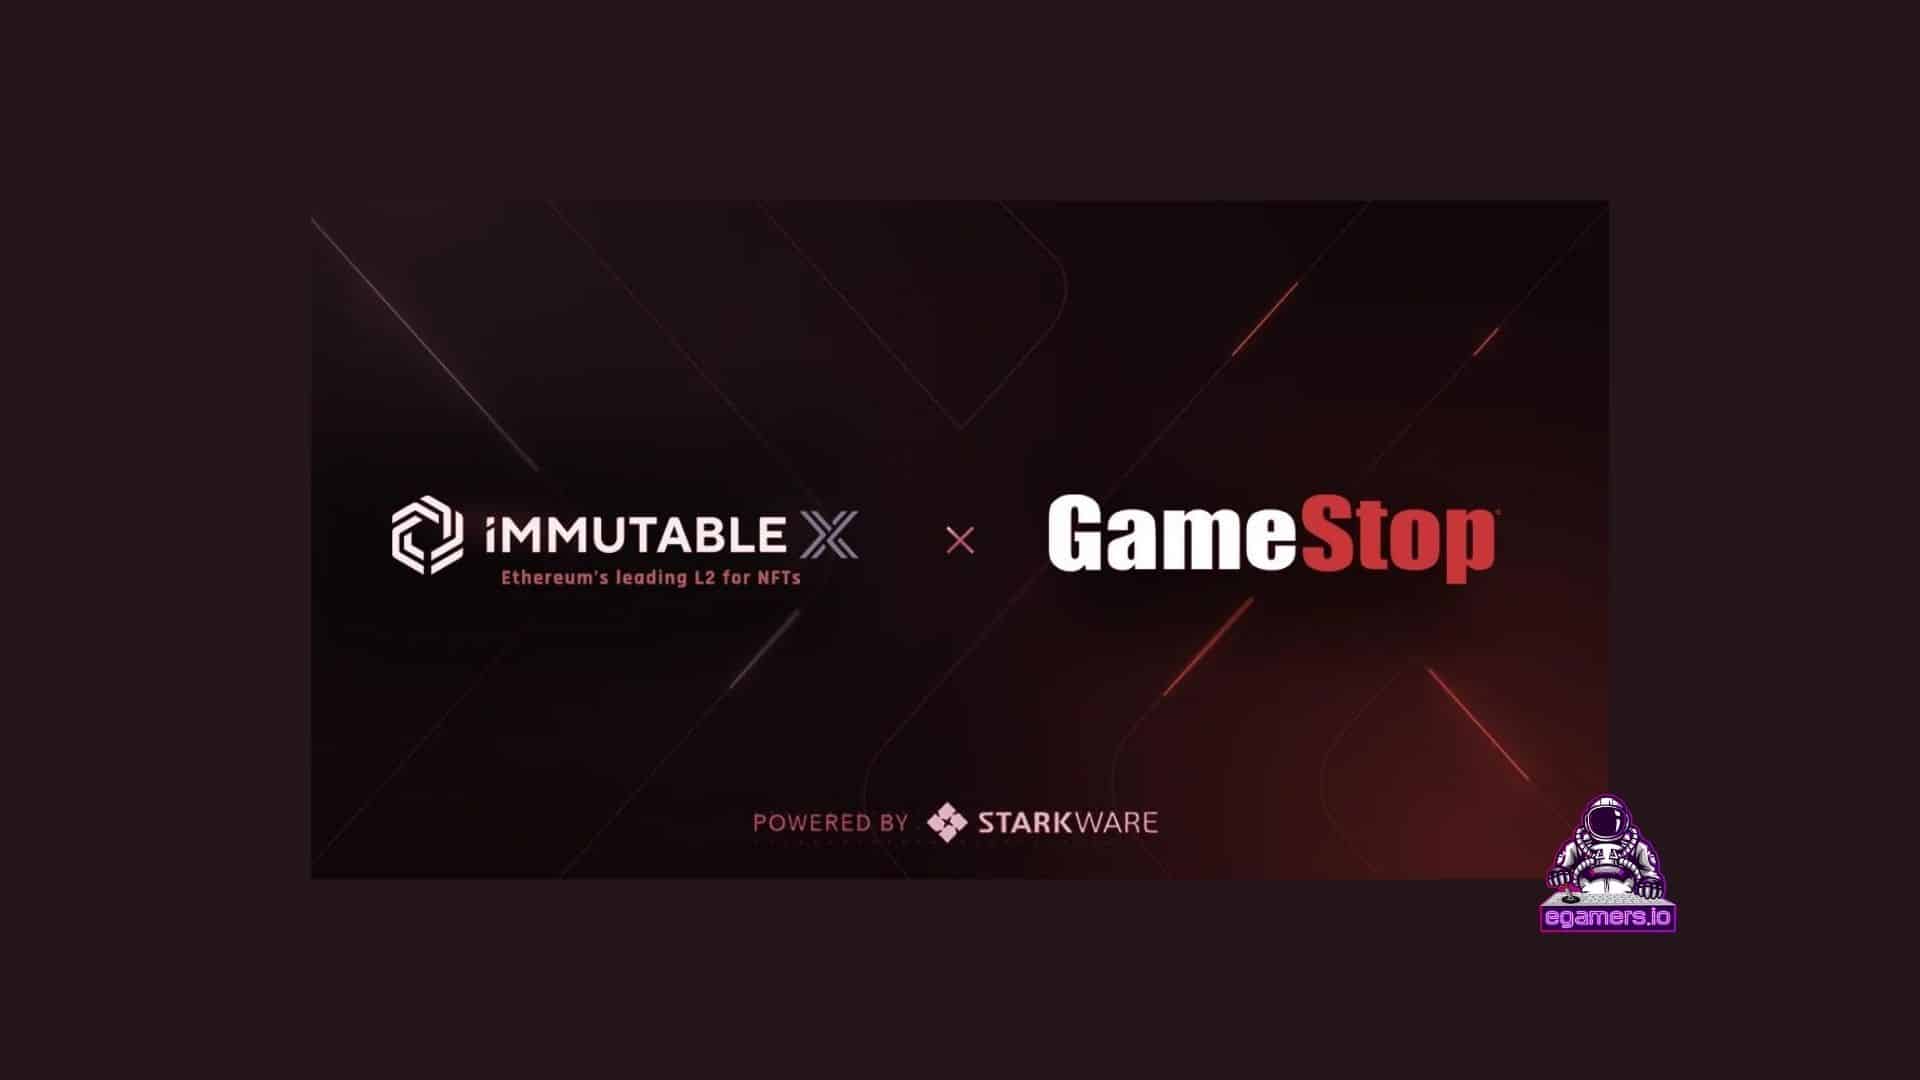 Immutable & GameStop Fund $100M For NFT Marketplace